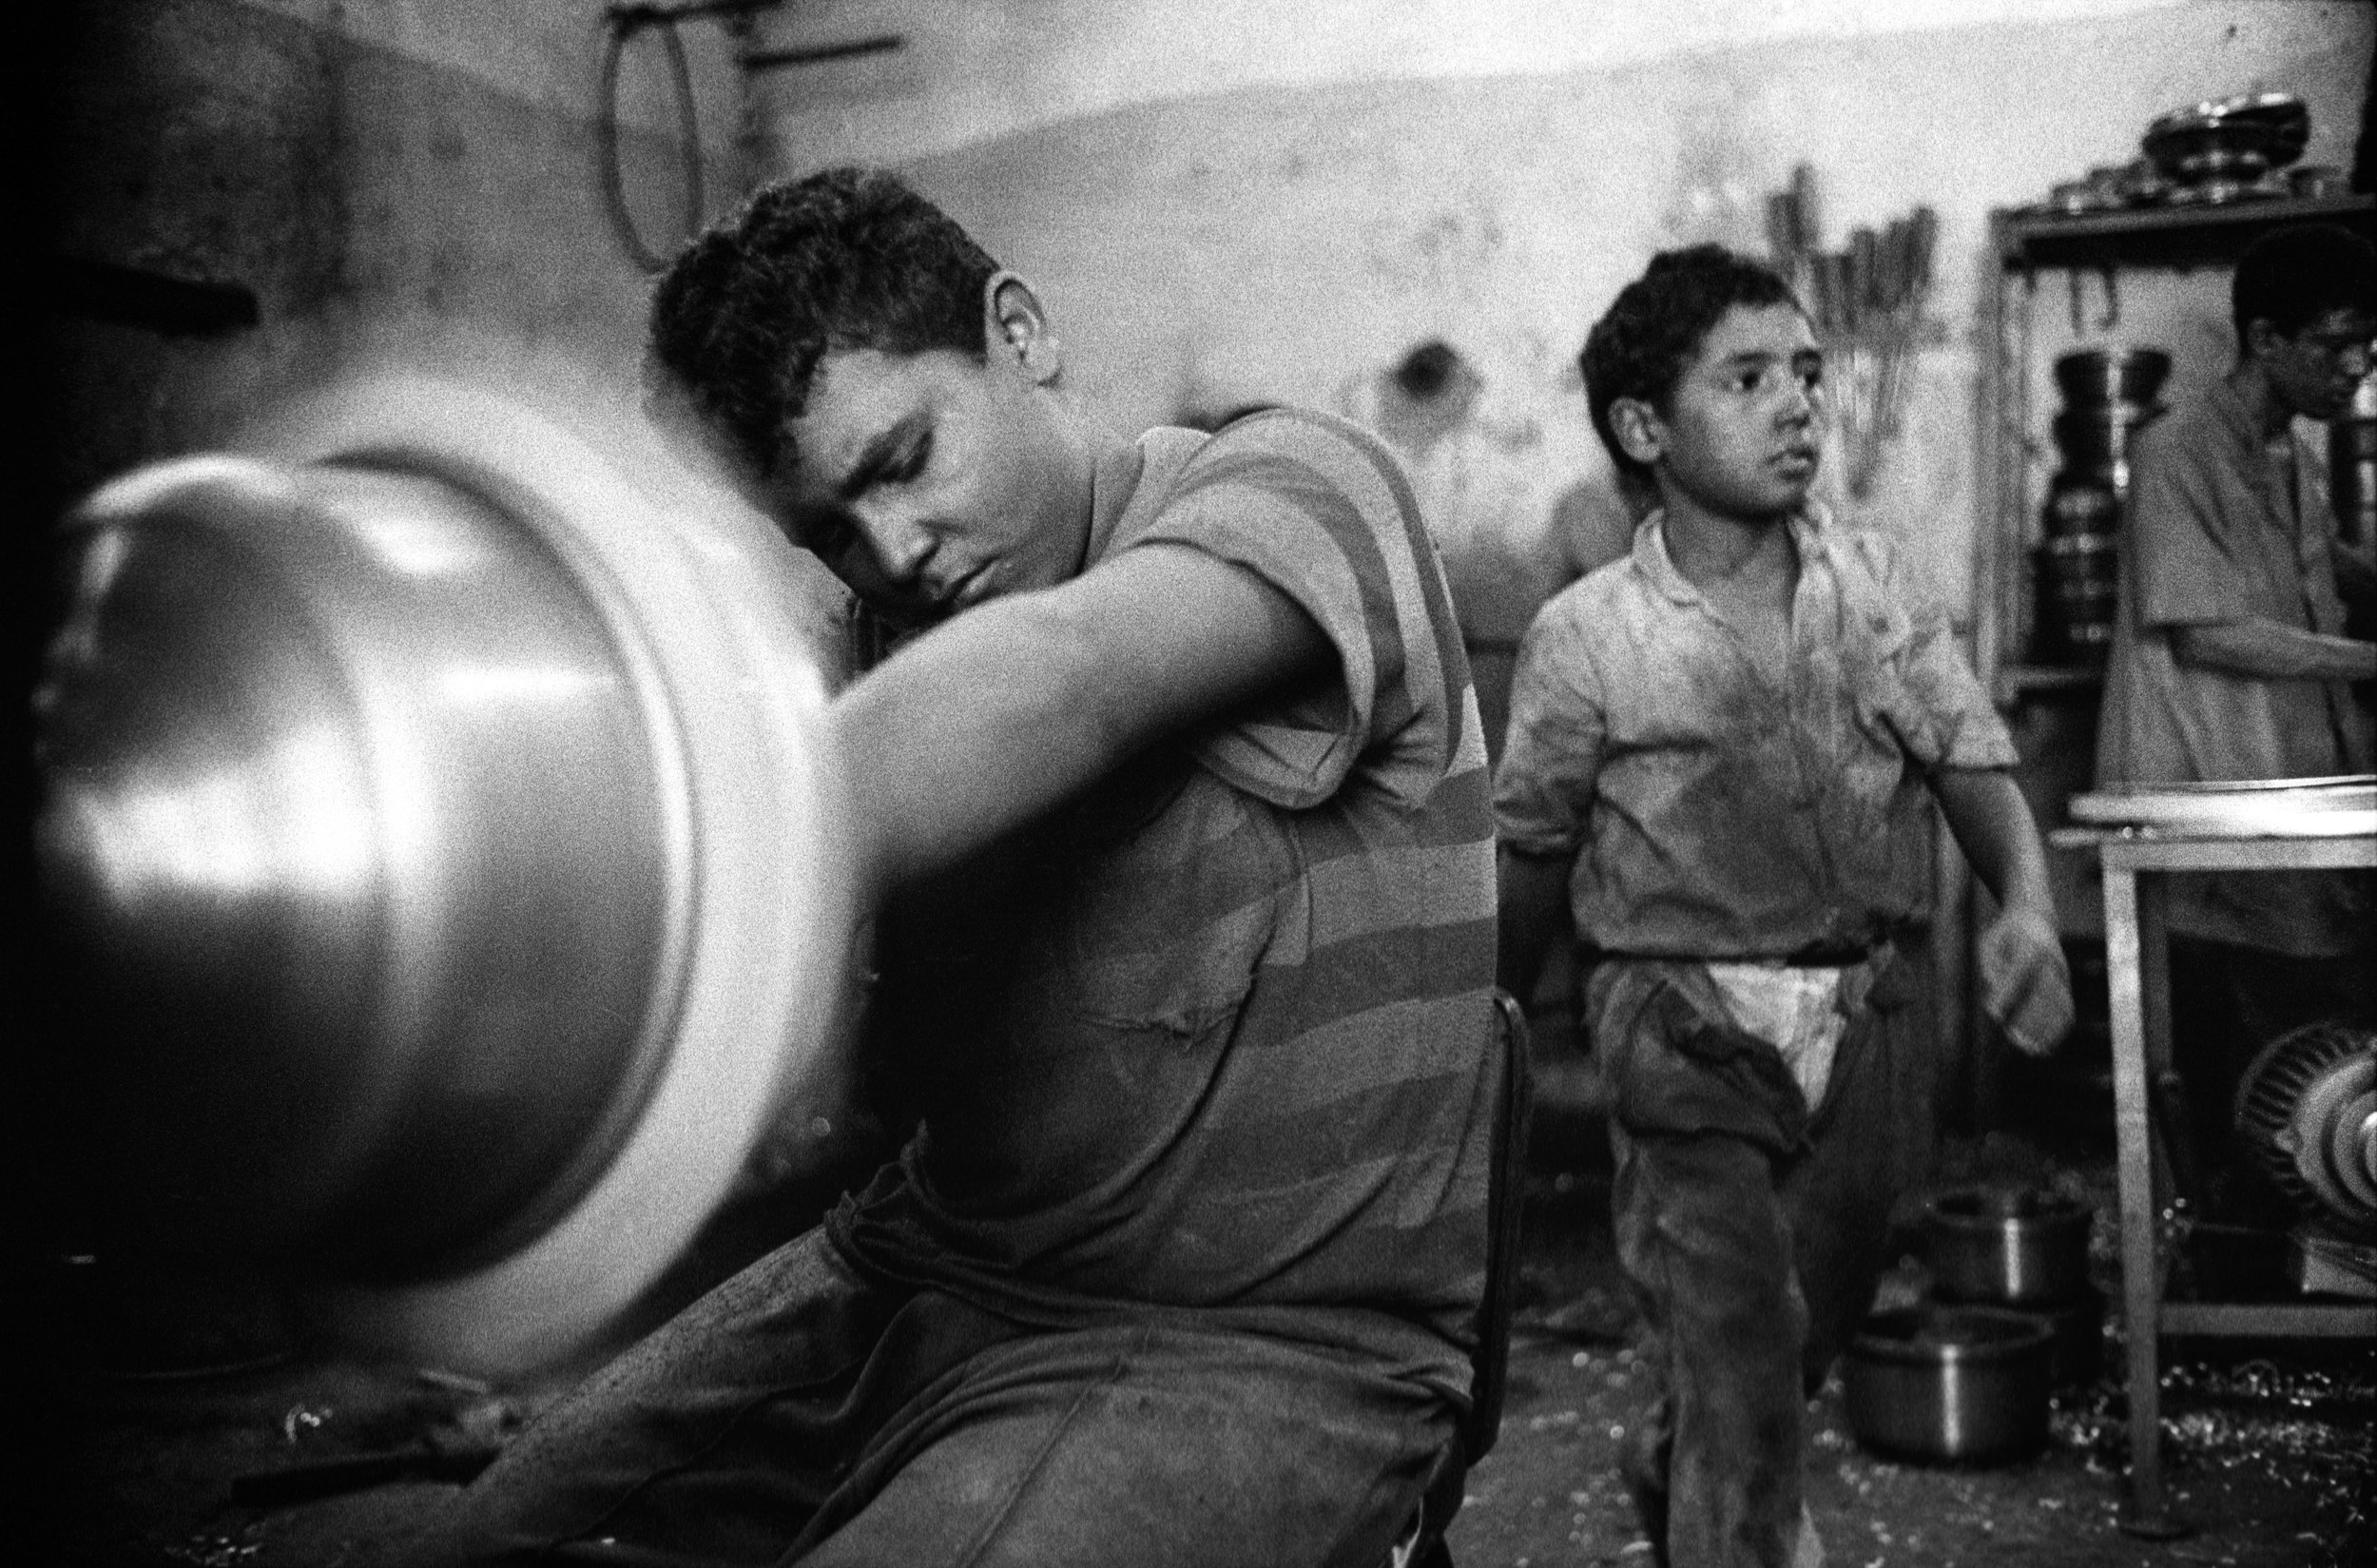  More than 200 boys work daily 8 hour shifts in an airless, makeshift aluminum pot factory. 